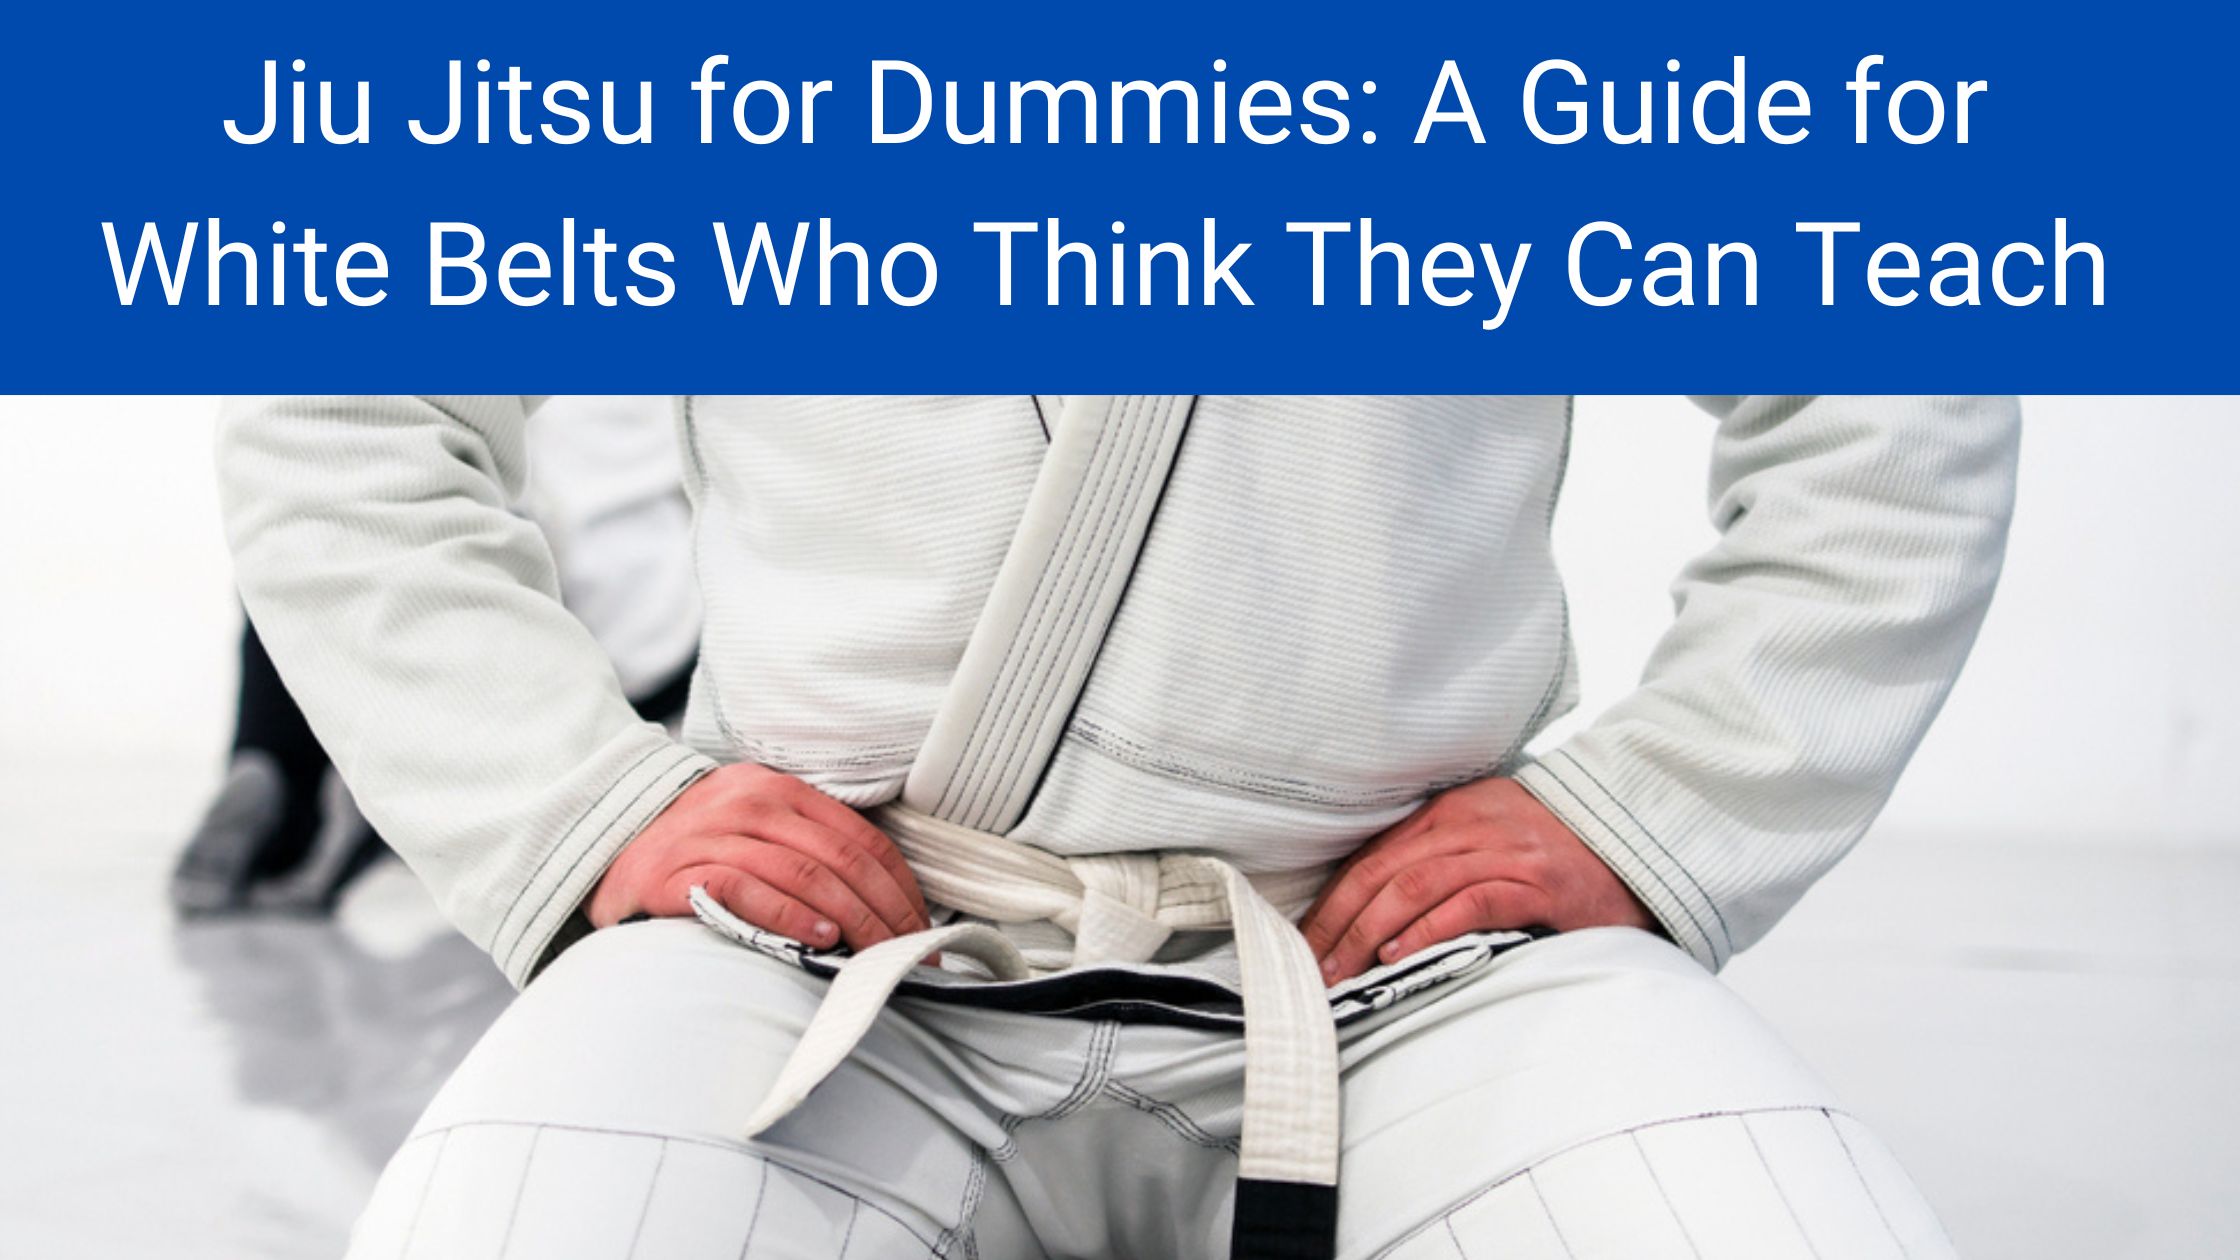 Jiu Jitsu for Dummies: A Guide for White Belts Who Think They Can Teach